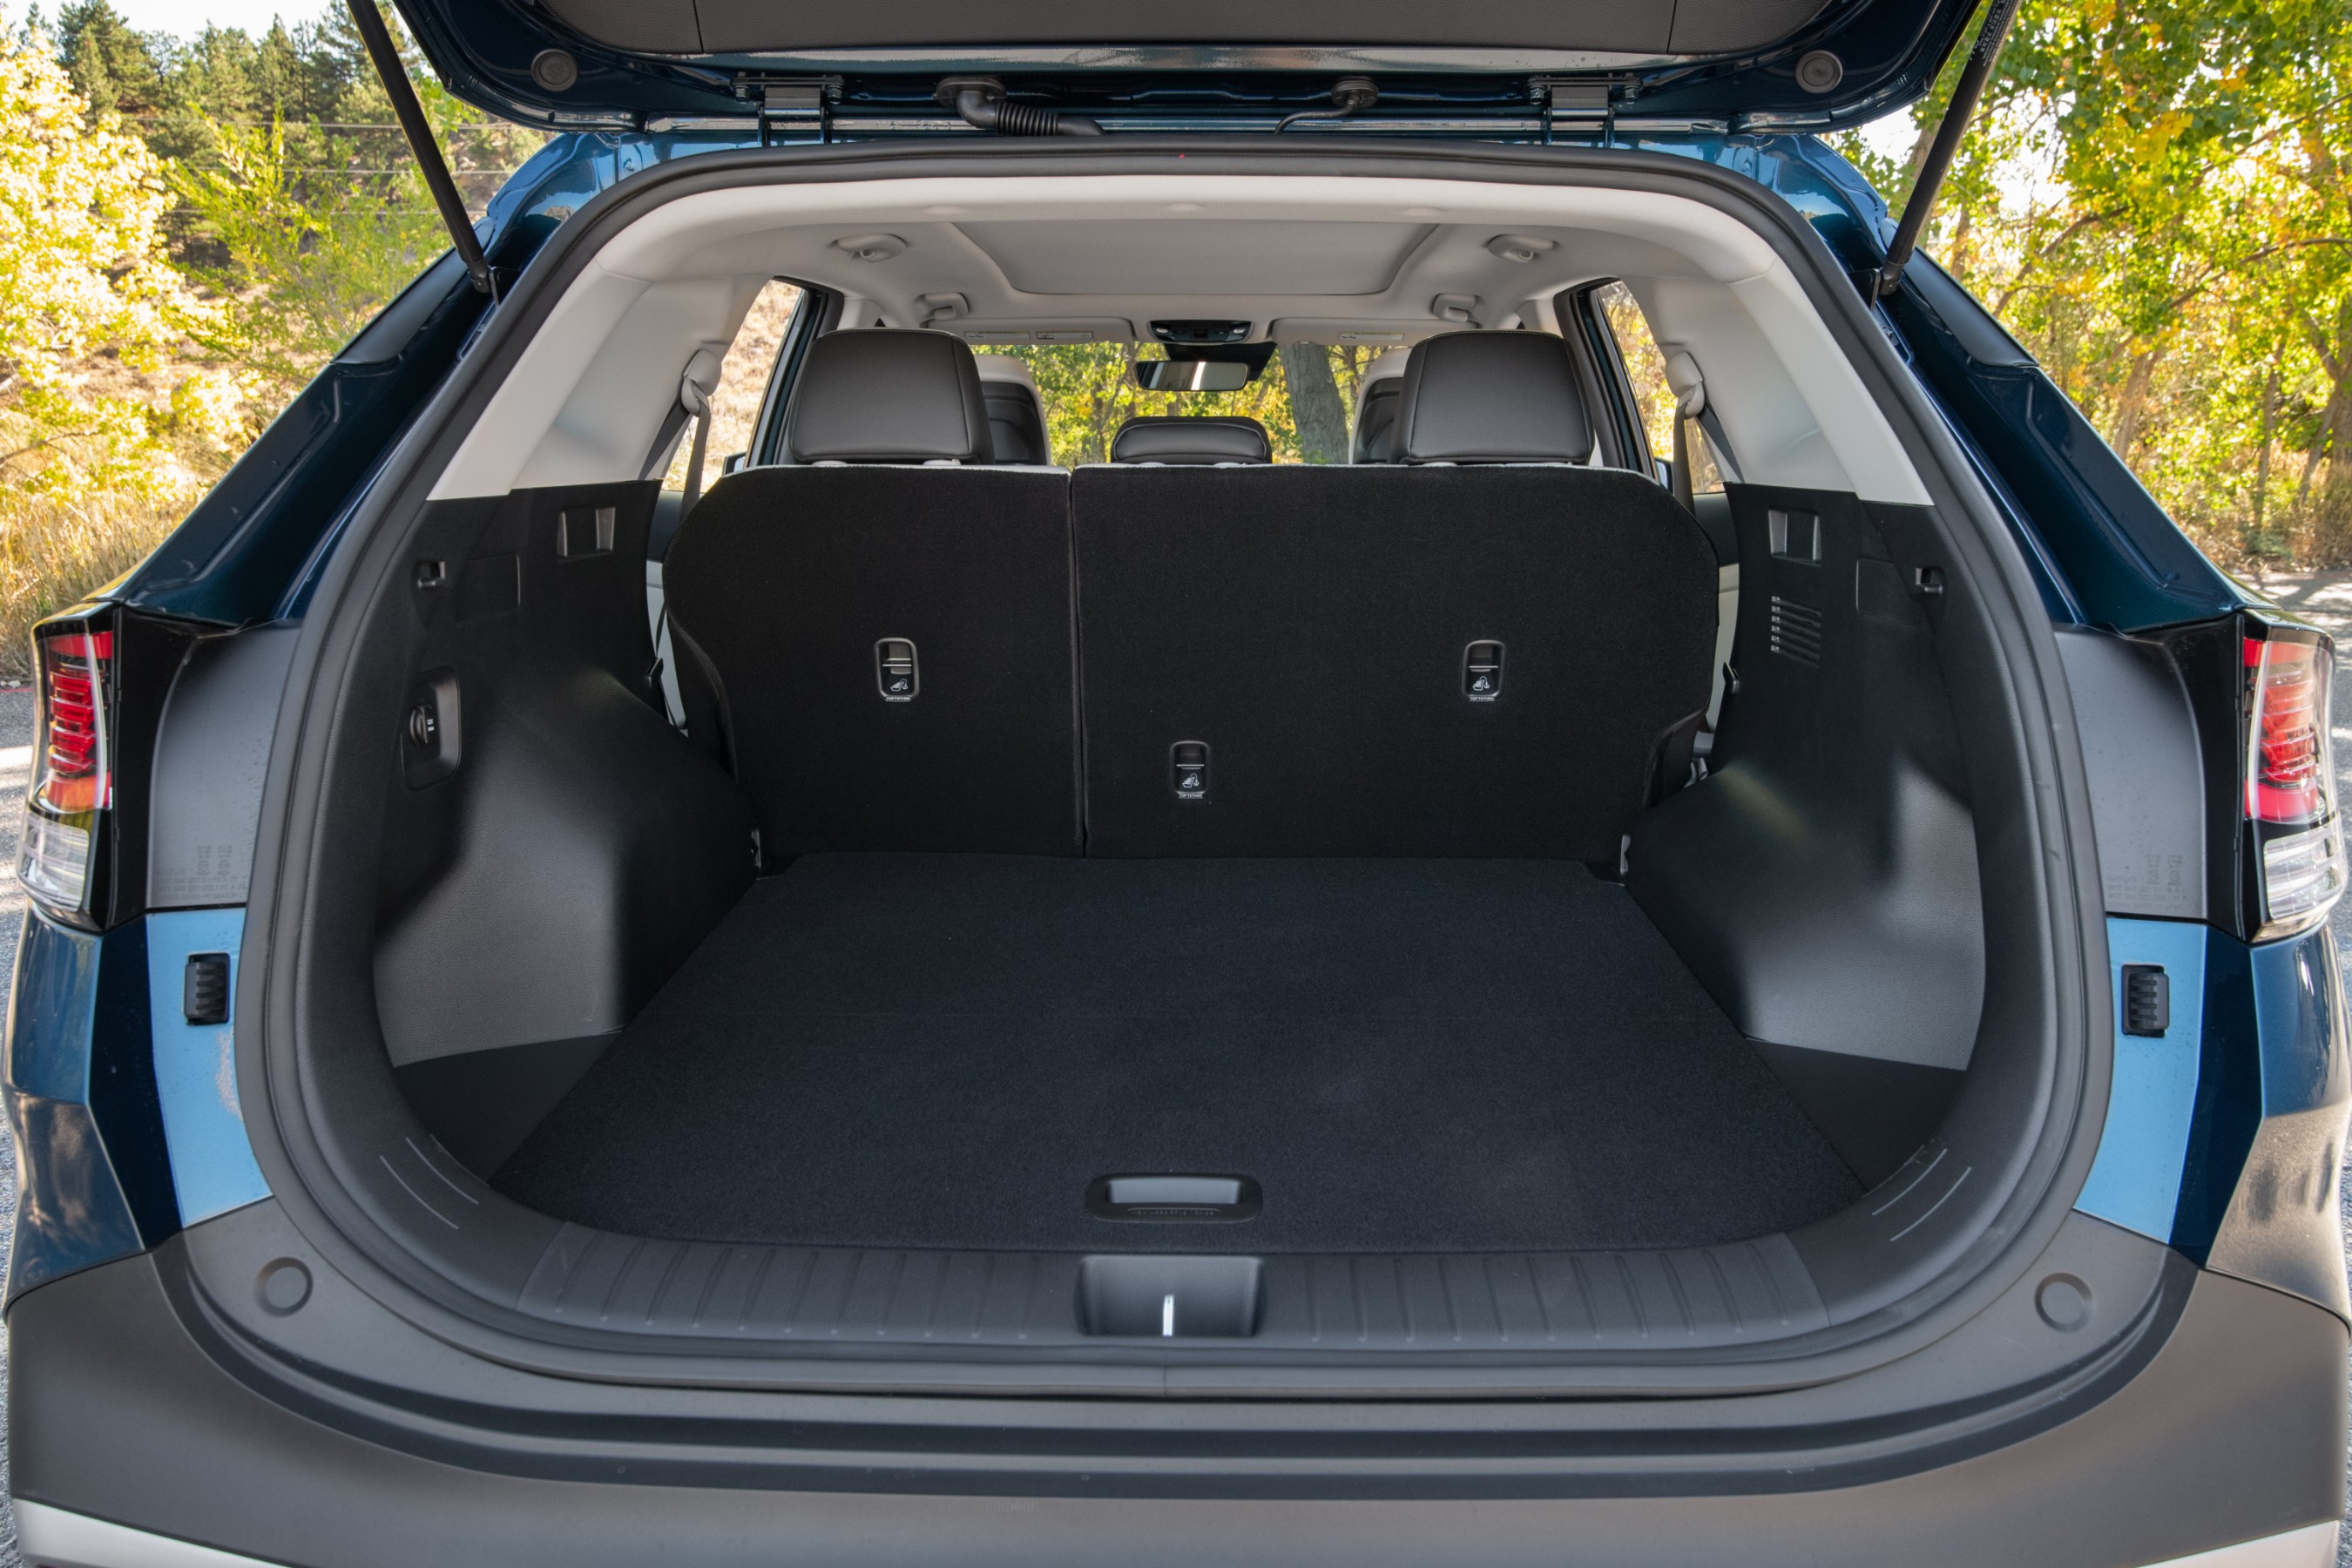 Larger in every dimension, the 2023 Sportage Hybrid provides owners with best-in-class rear legroom and cargo room.